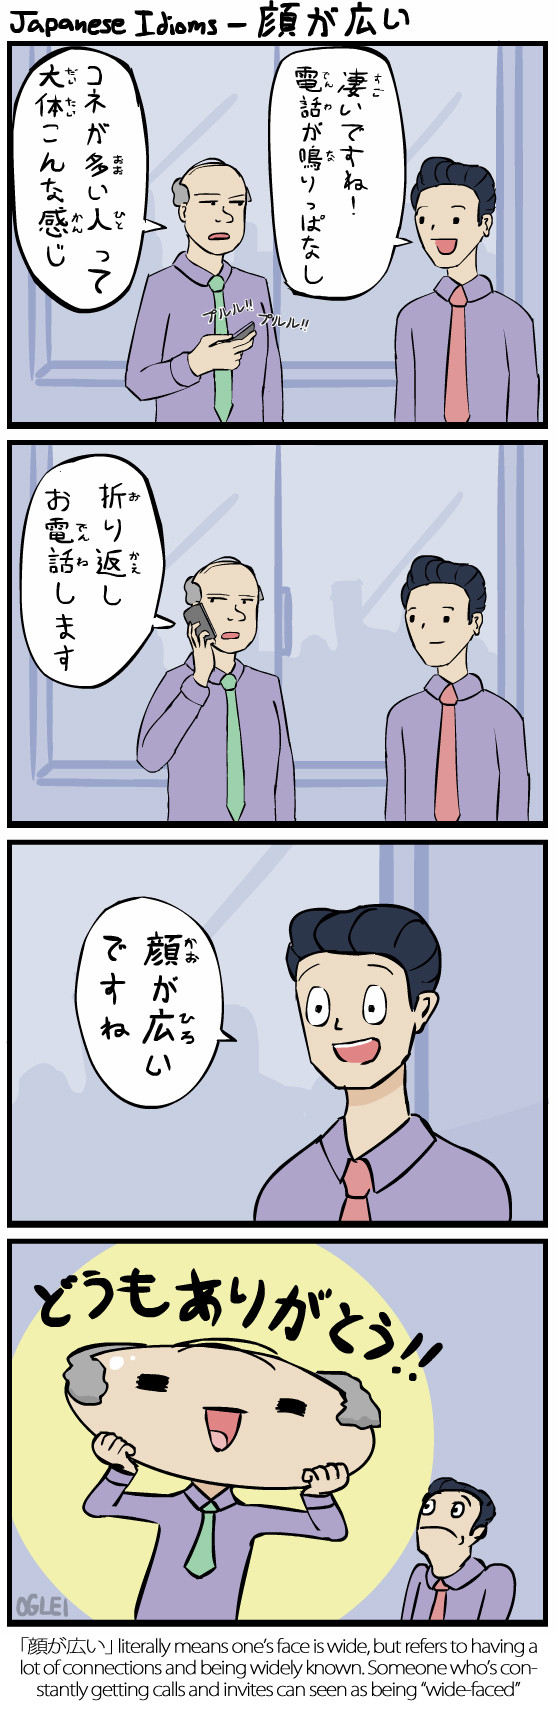 Japanese Idioms 1 - Wide Face - Japanese